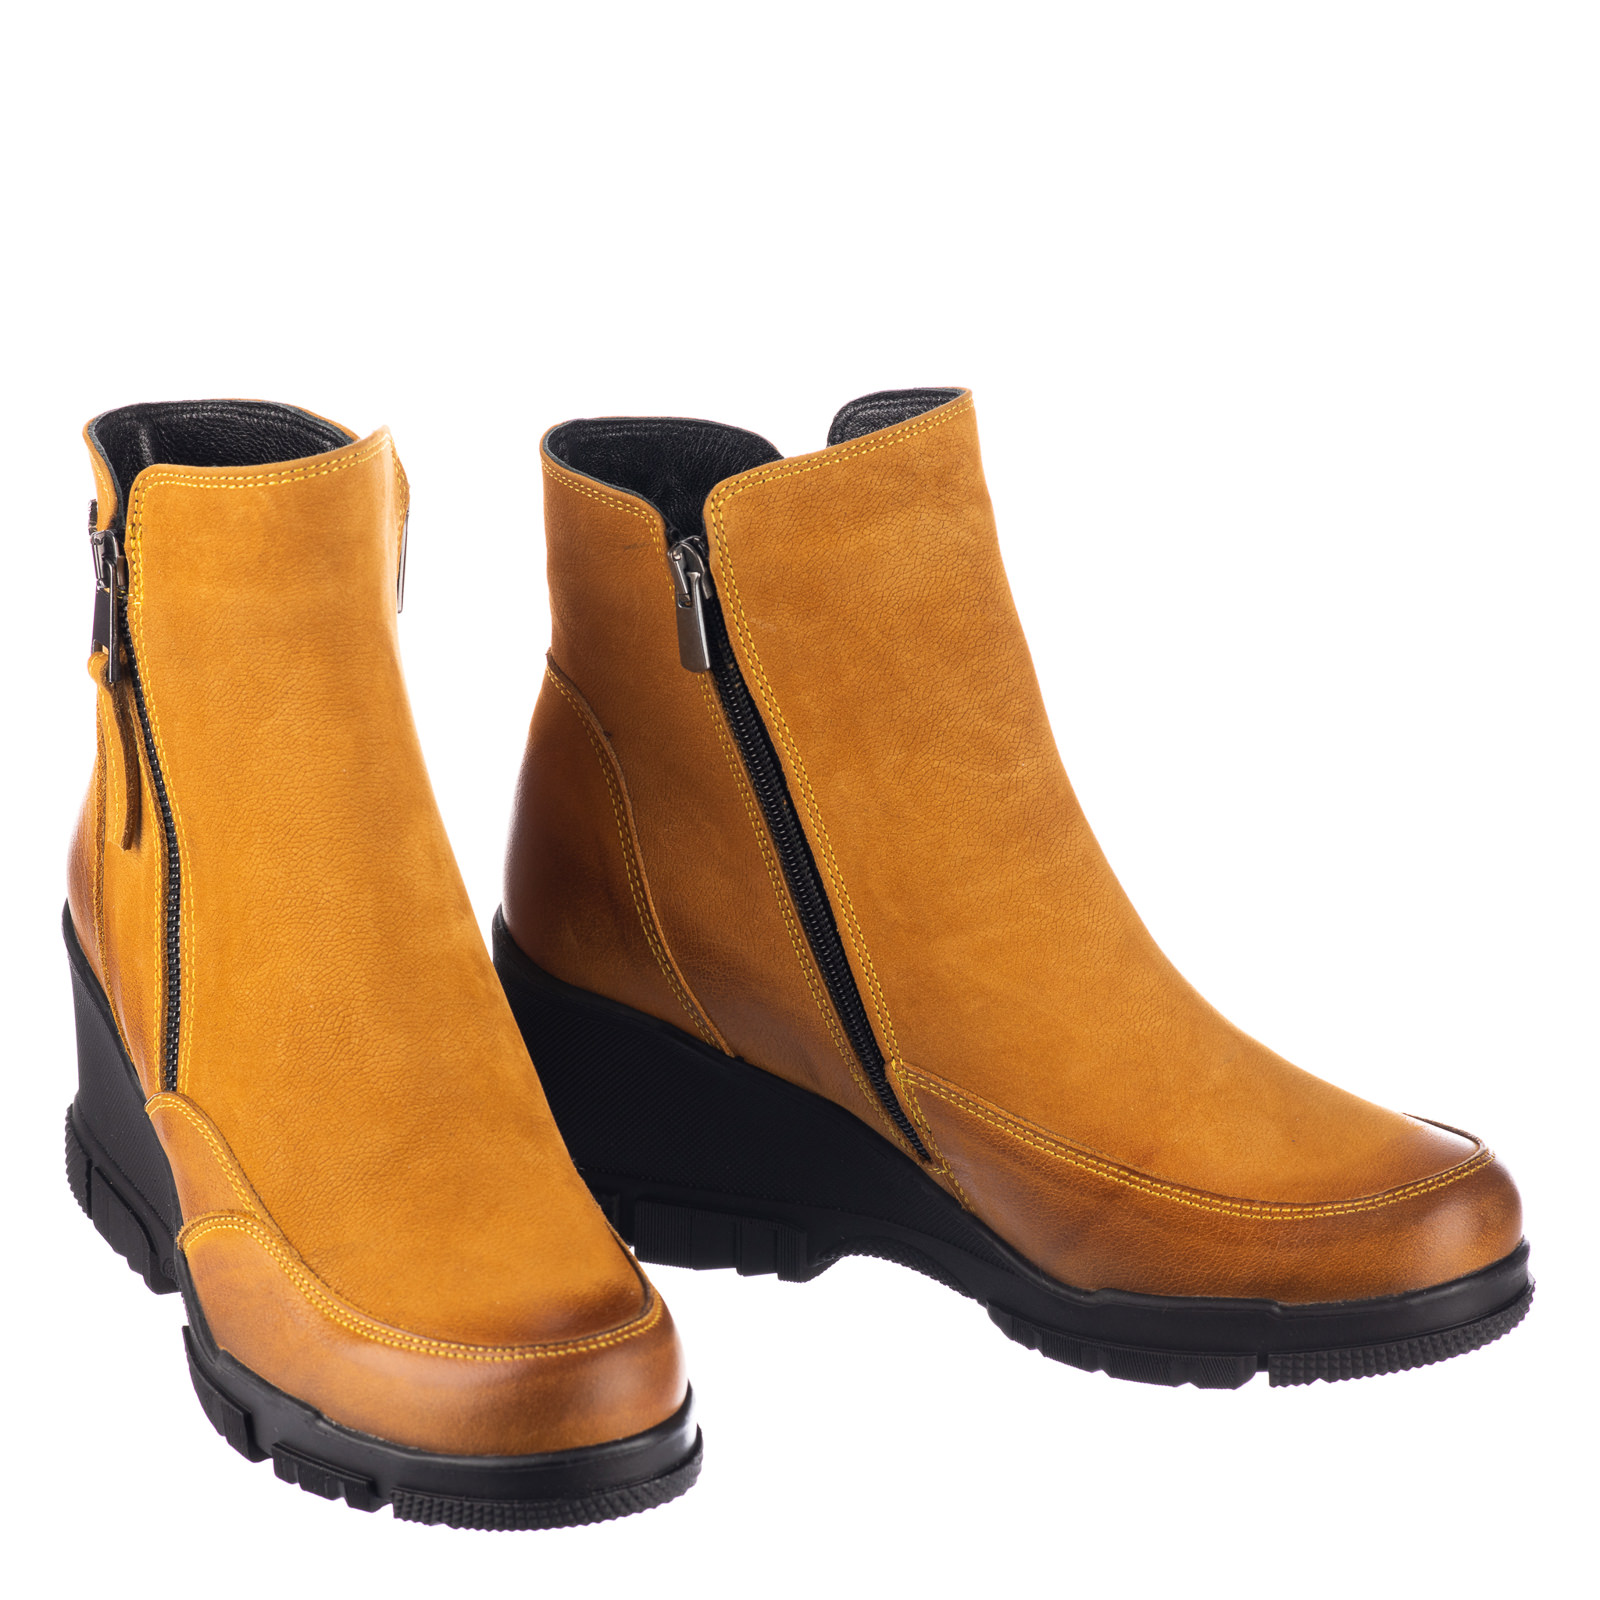 Leather ankle boots B350 - OCHRE